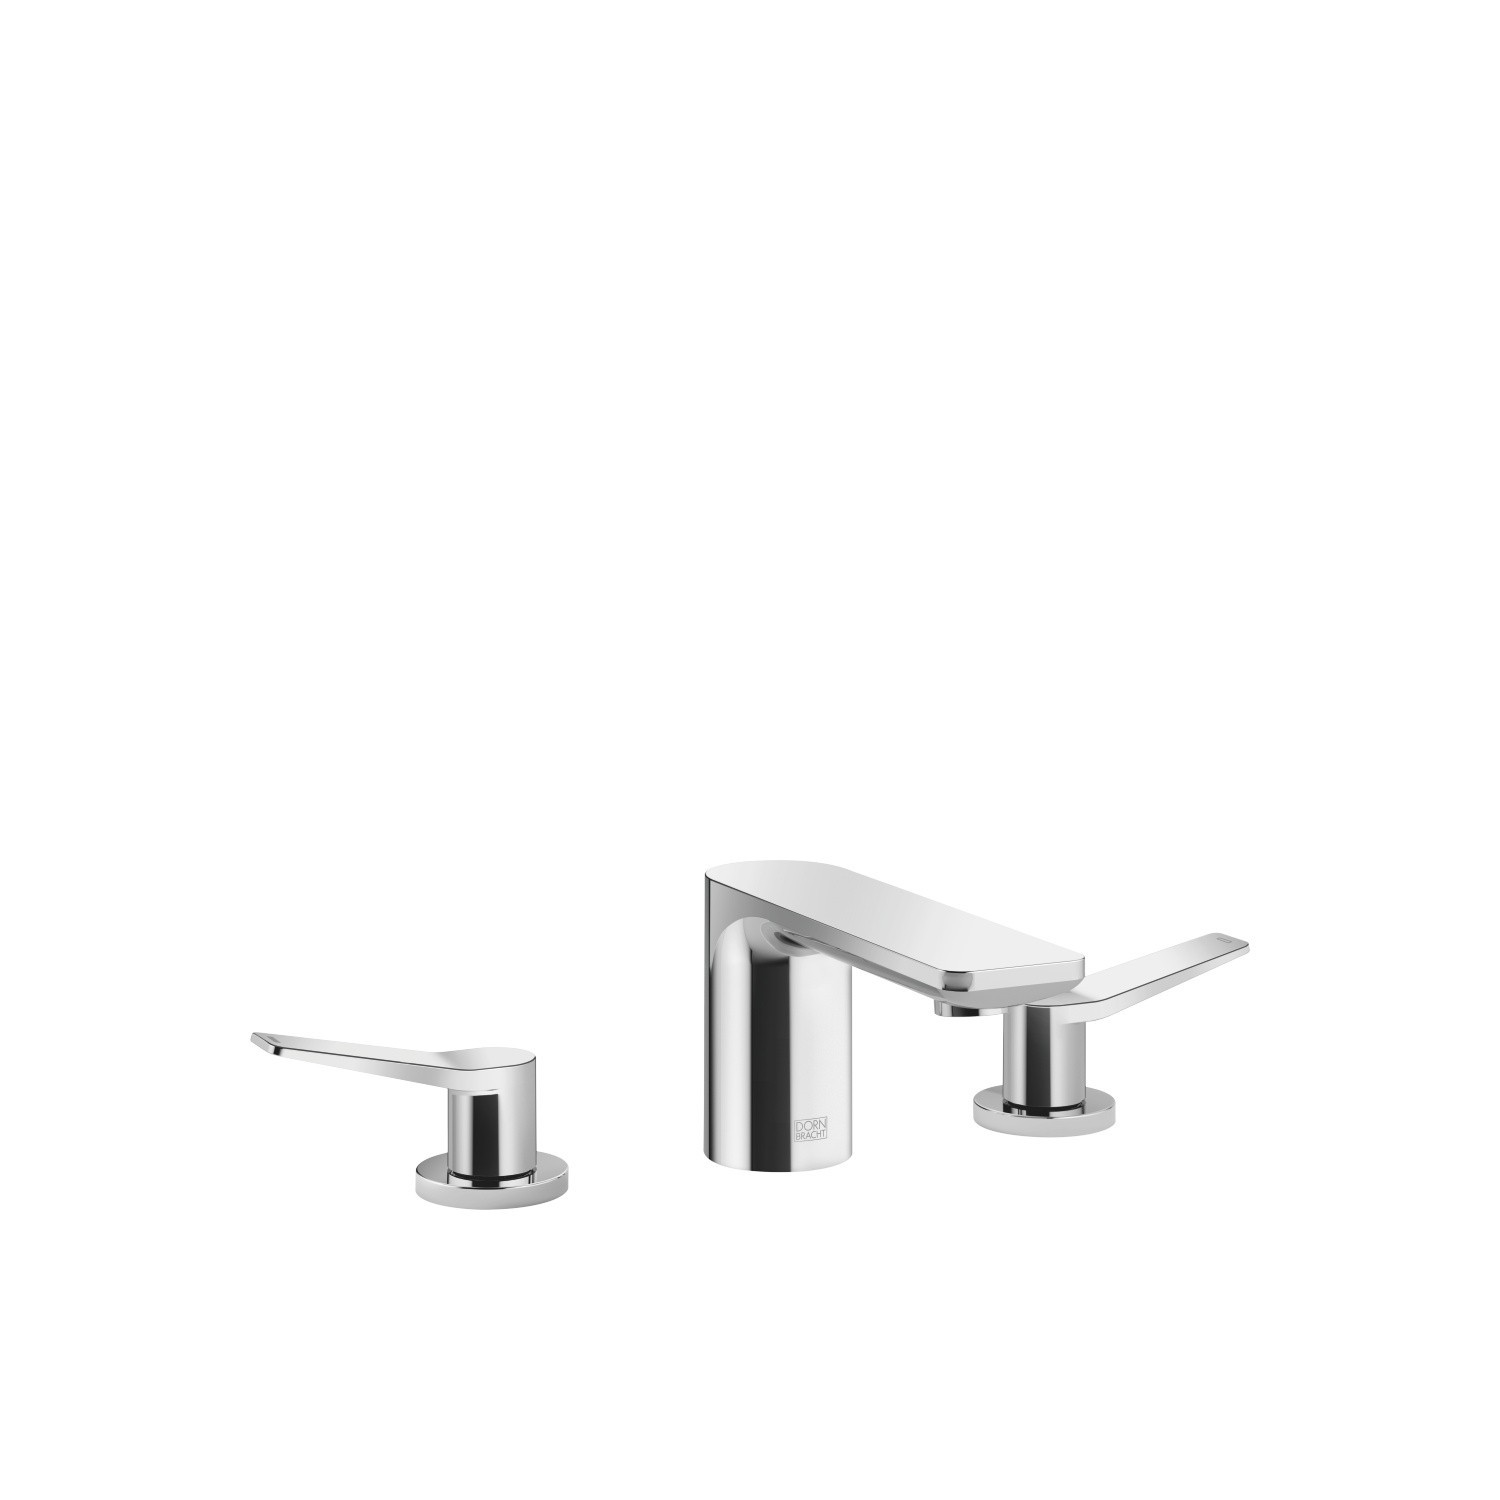 DORNBRACHT 20713845-0010 LISS THREE HOLES DECK MOUNT LAVATORY MIXER WITH DRAIN AND BLADE HANDLES